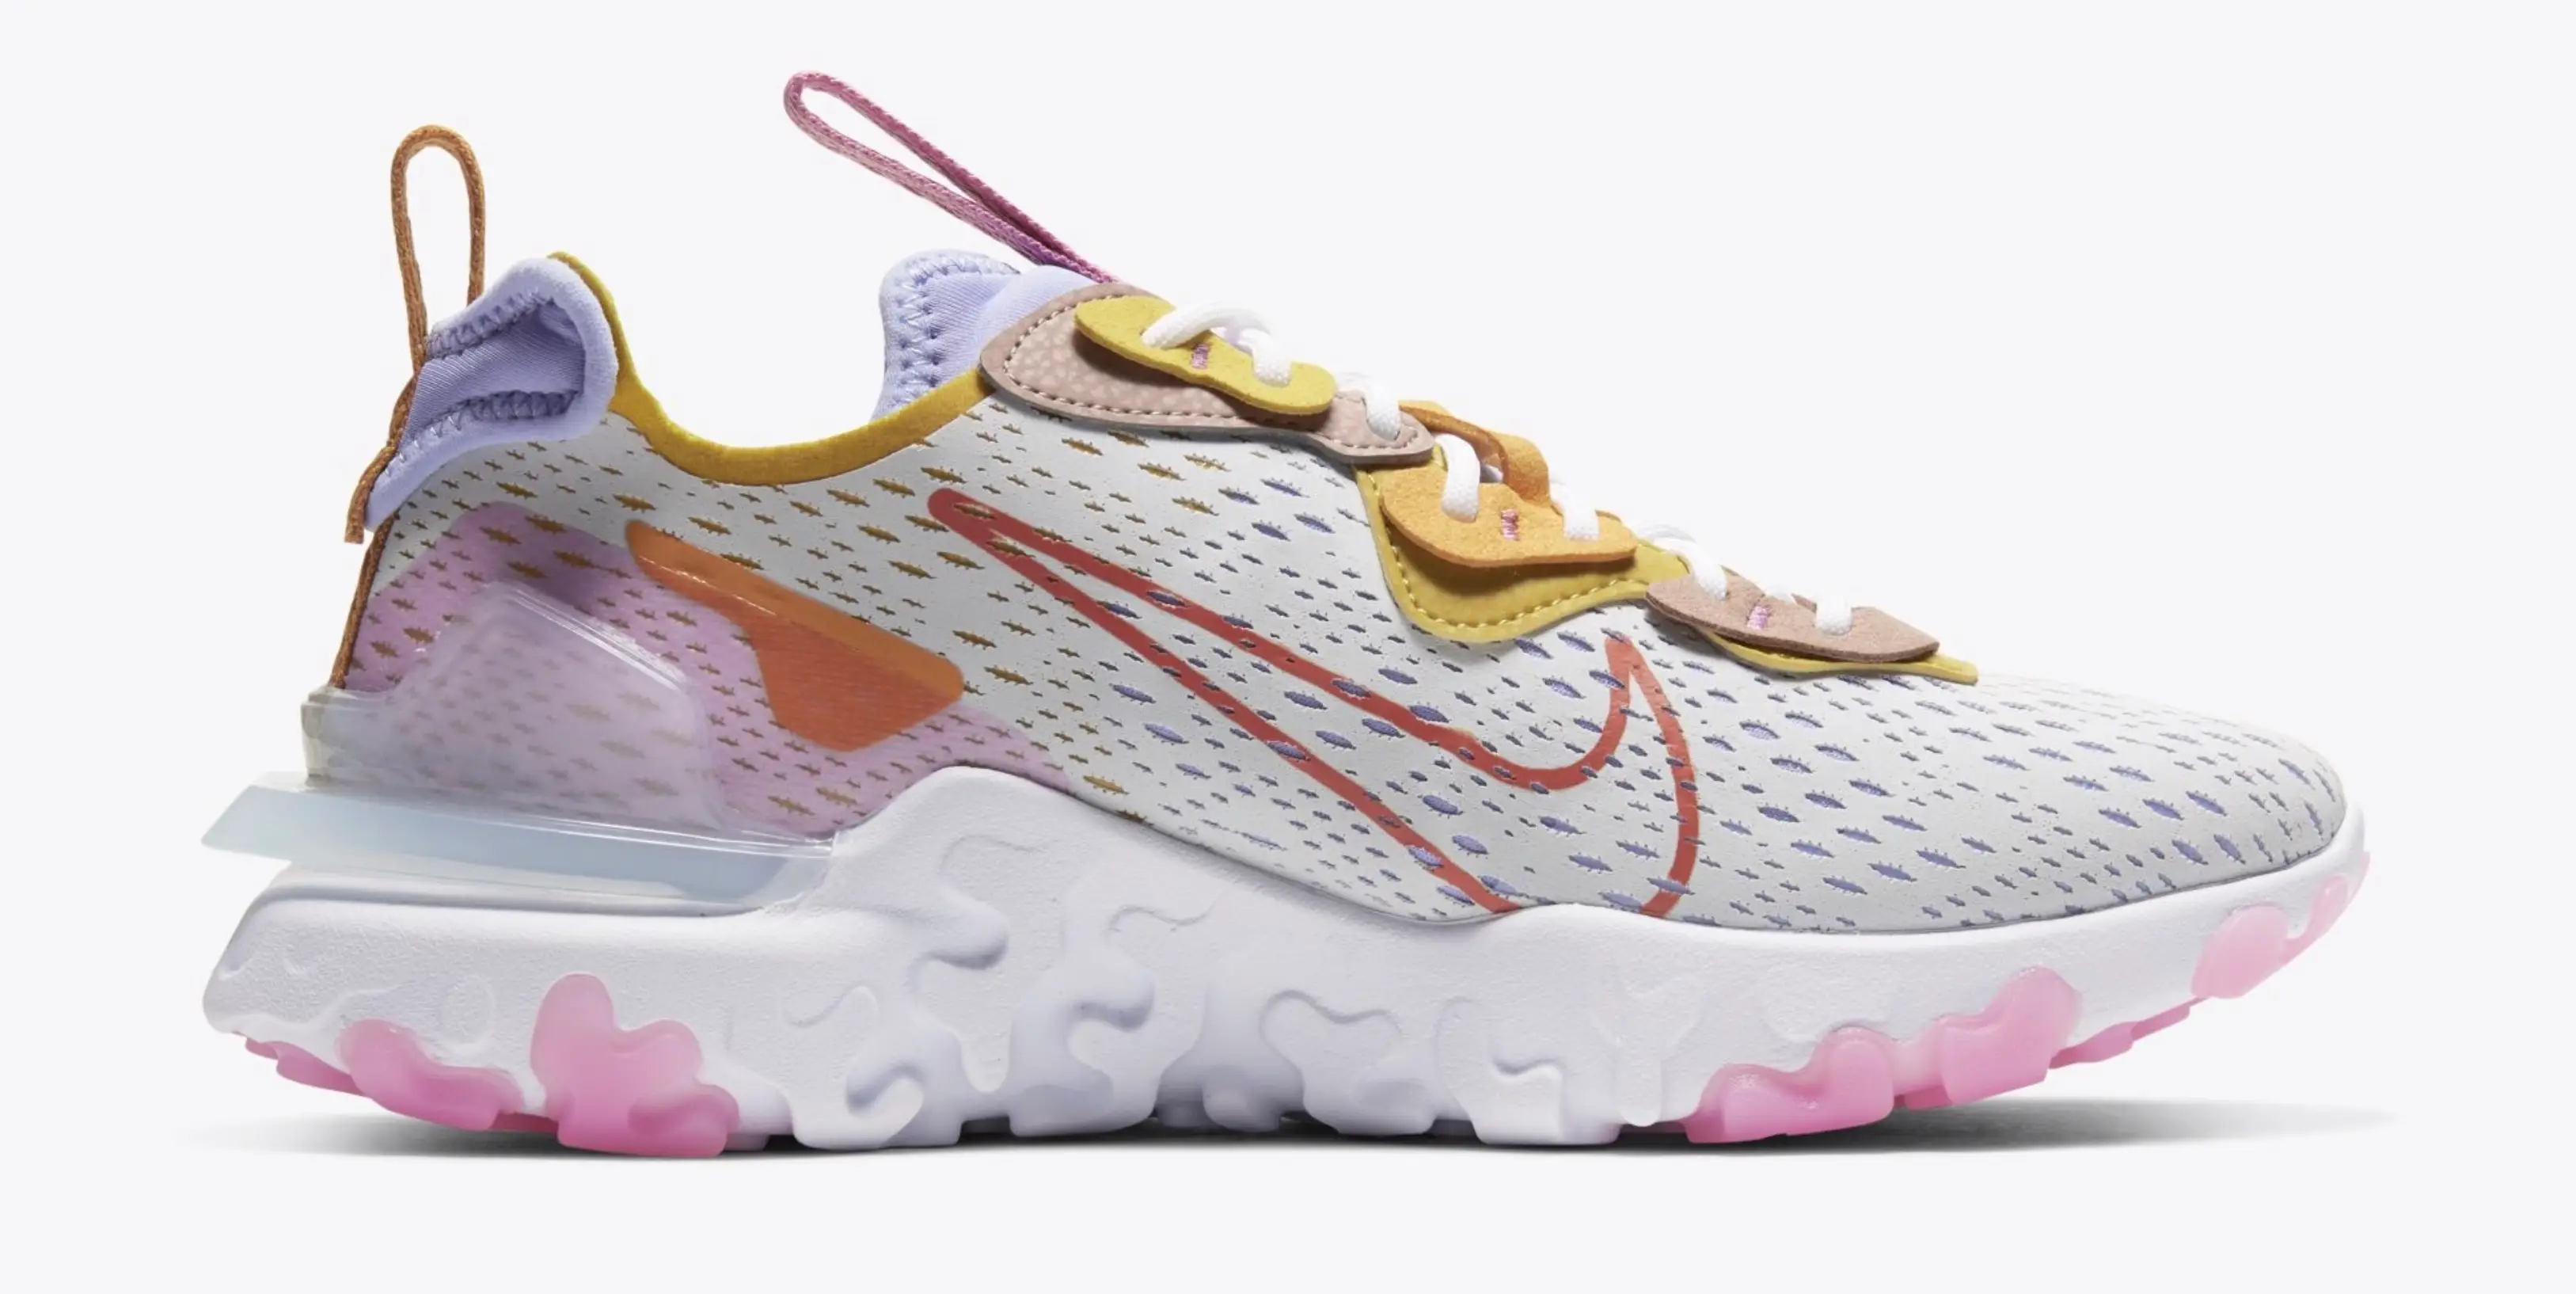 Change Up Your Collection With The Nike React Vision In Platinum & Pink ...